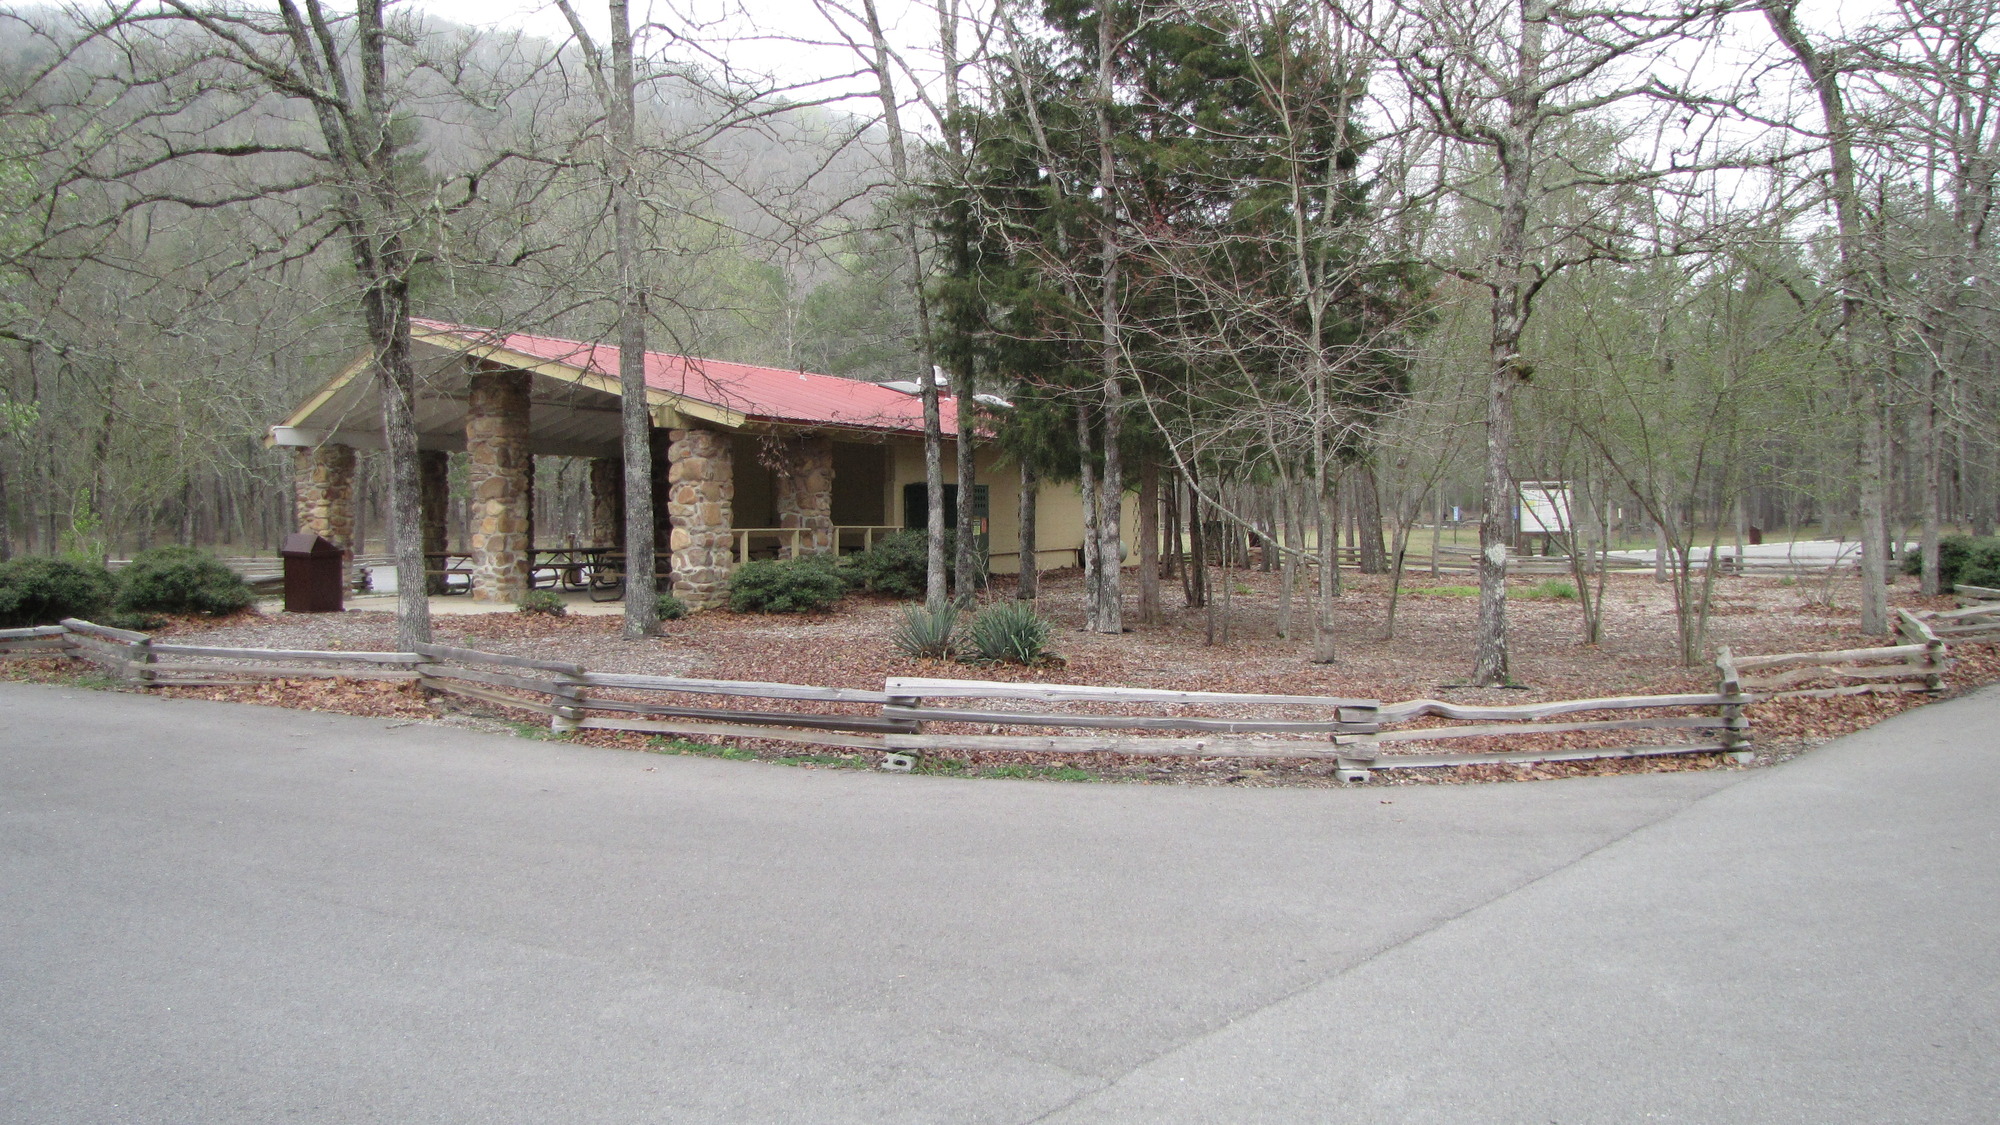 Canyon Mouth Park features a pavilion and restrooms with running water.